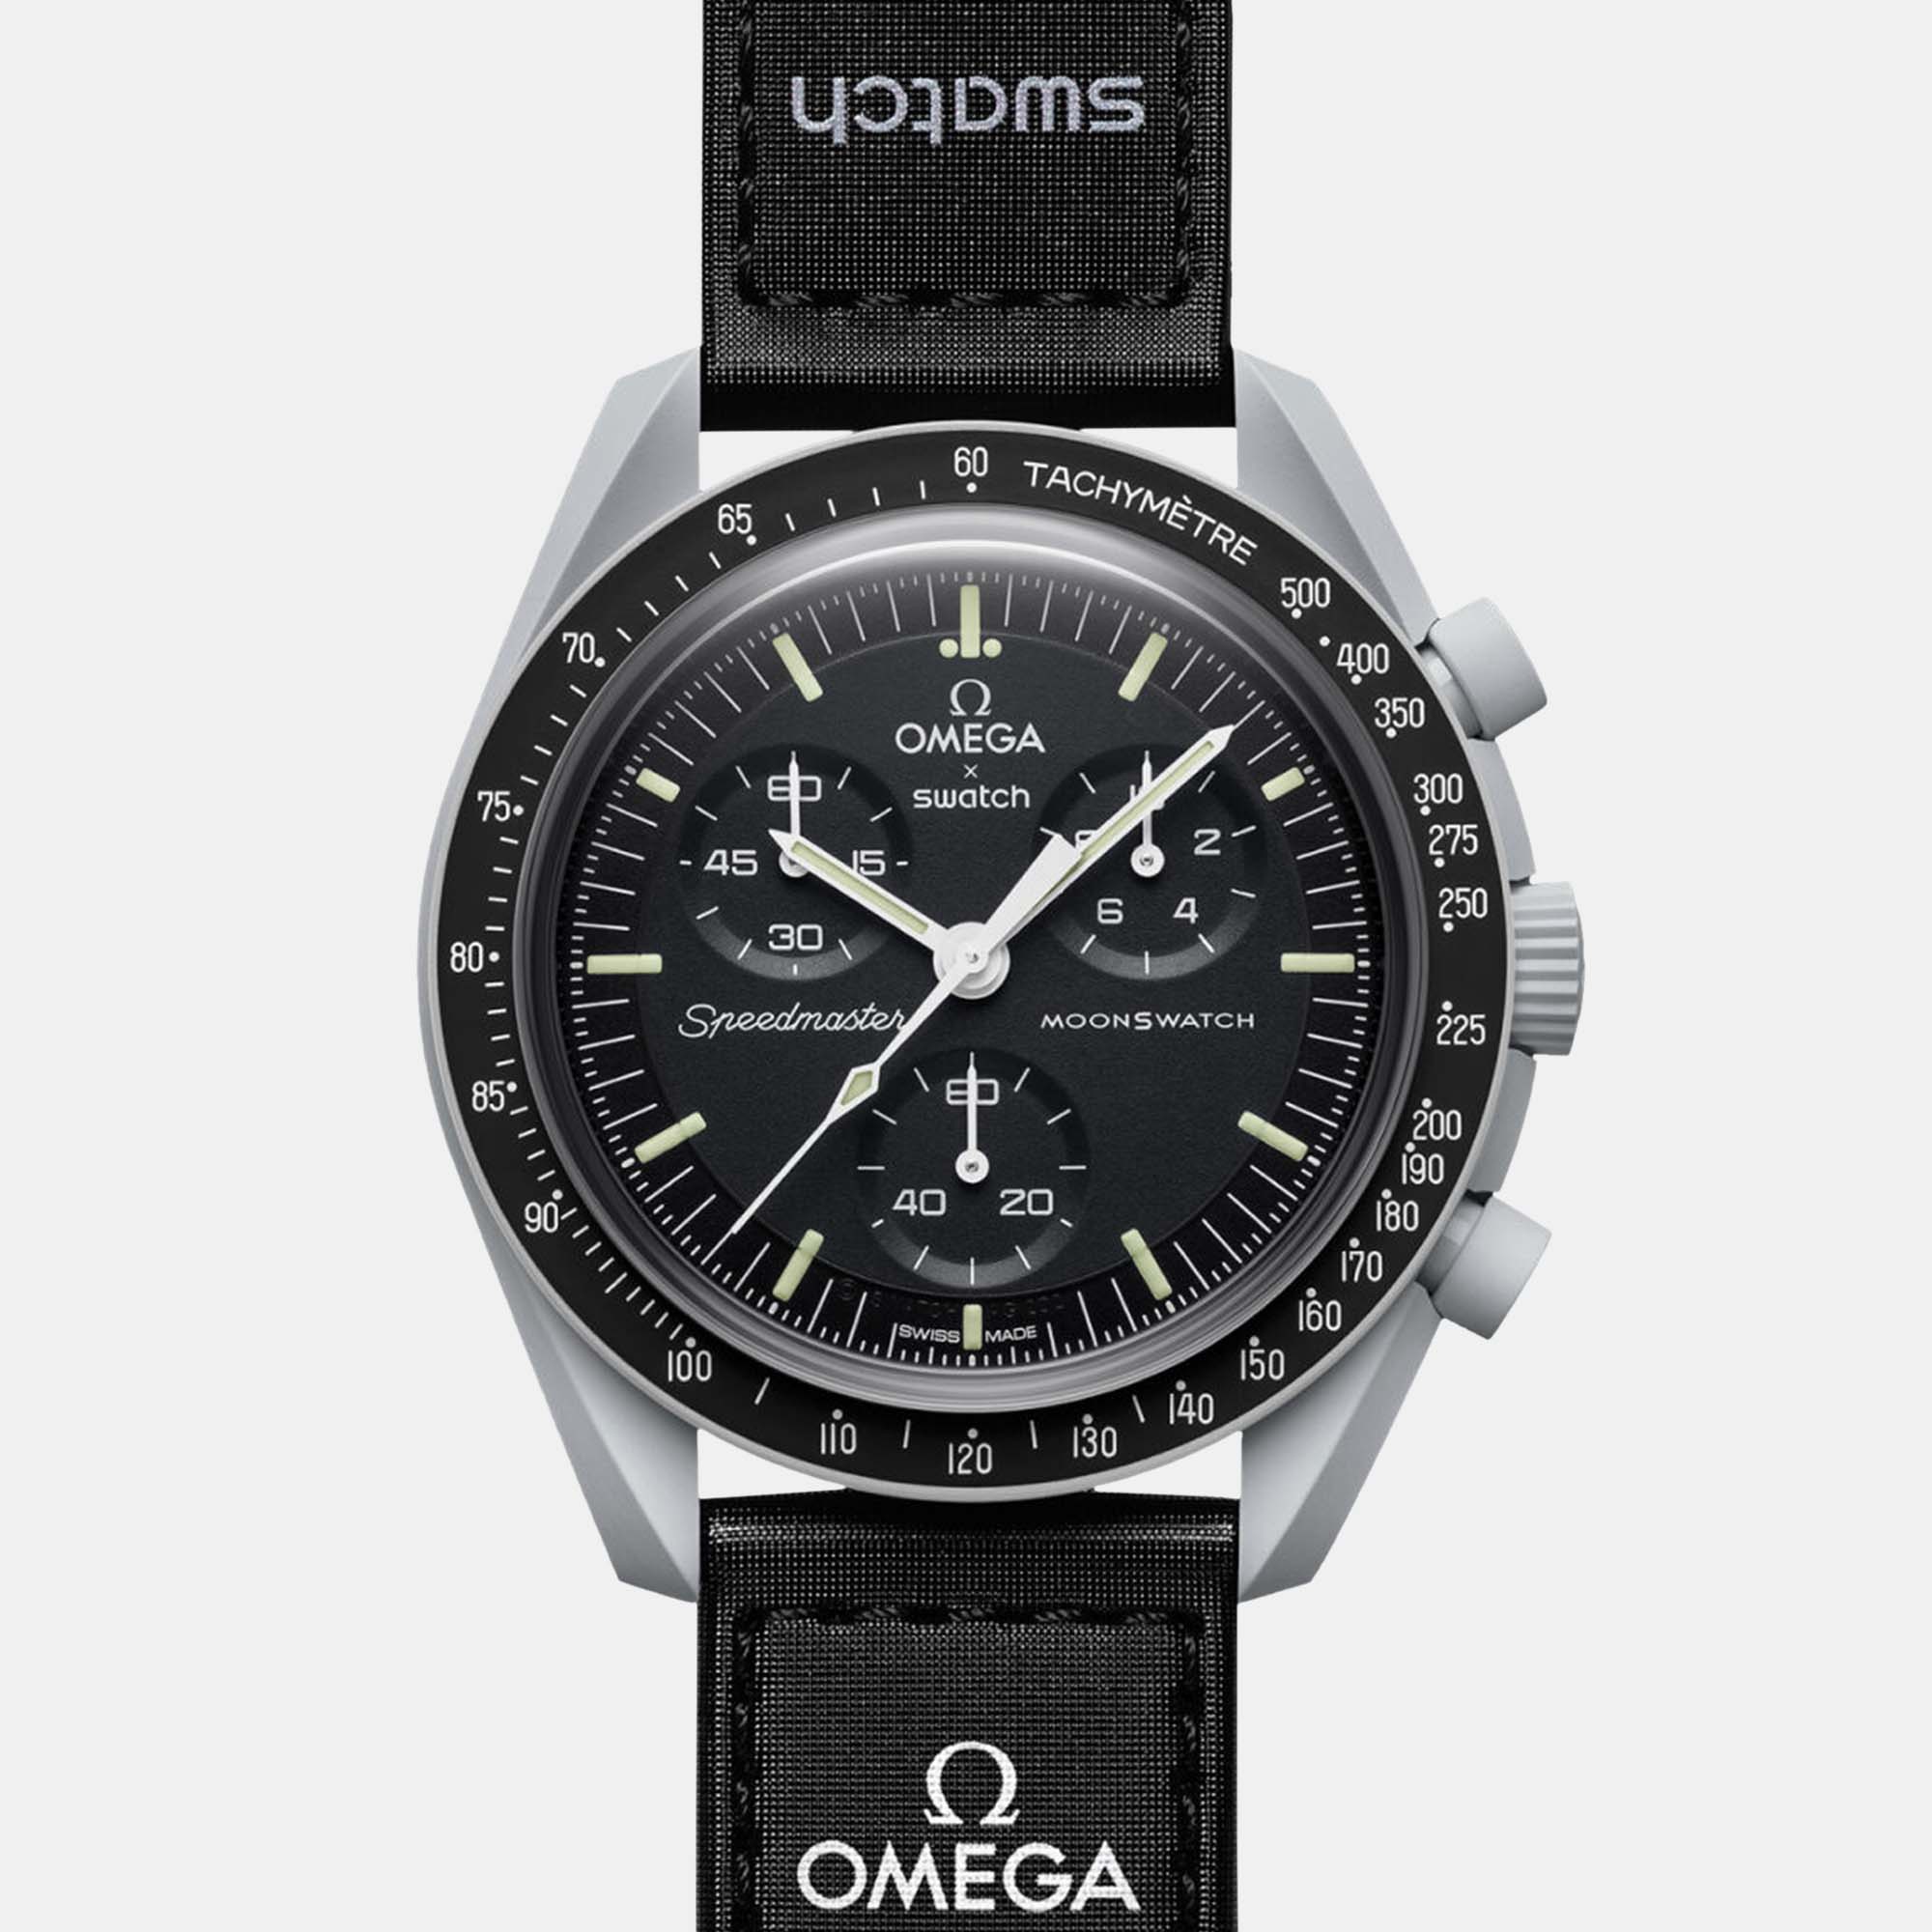 

Omega Grey Velcro Moon Swatch Mission To The Moon 42 mm, Black